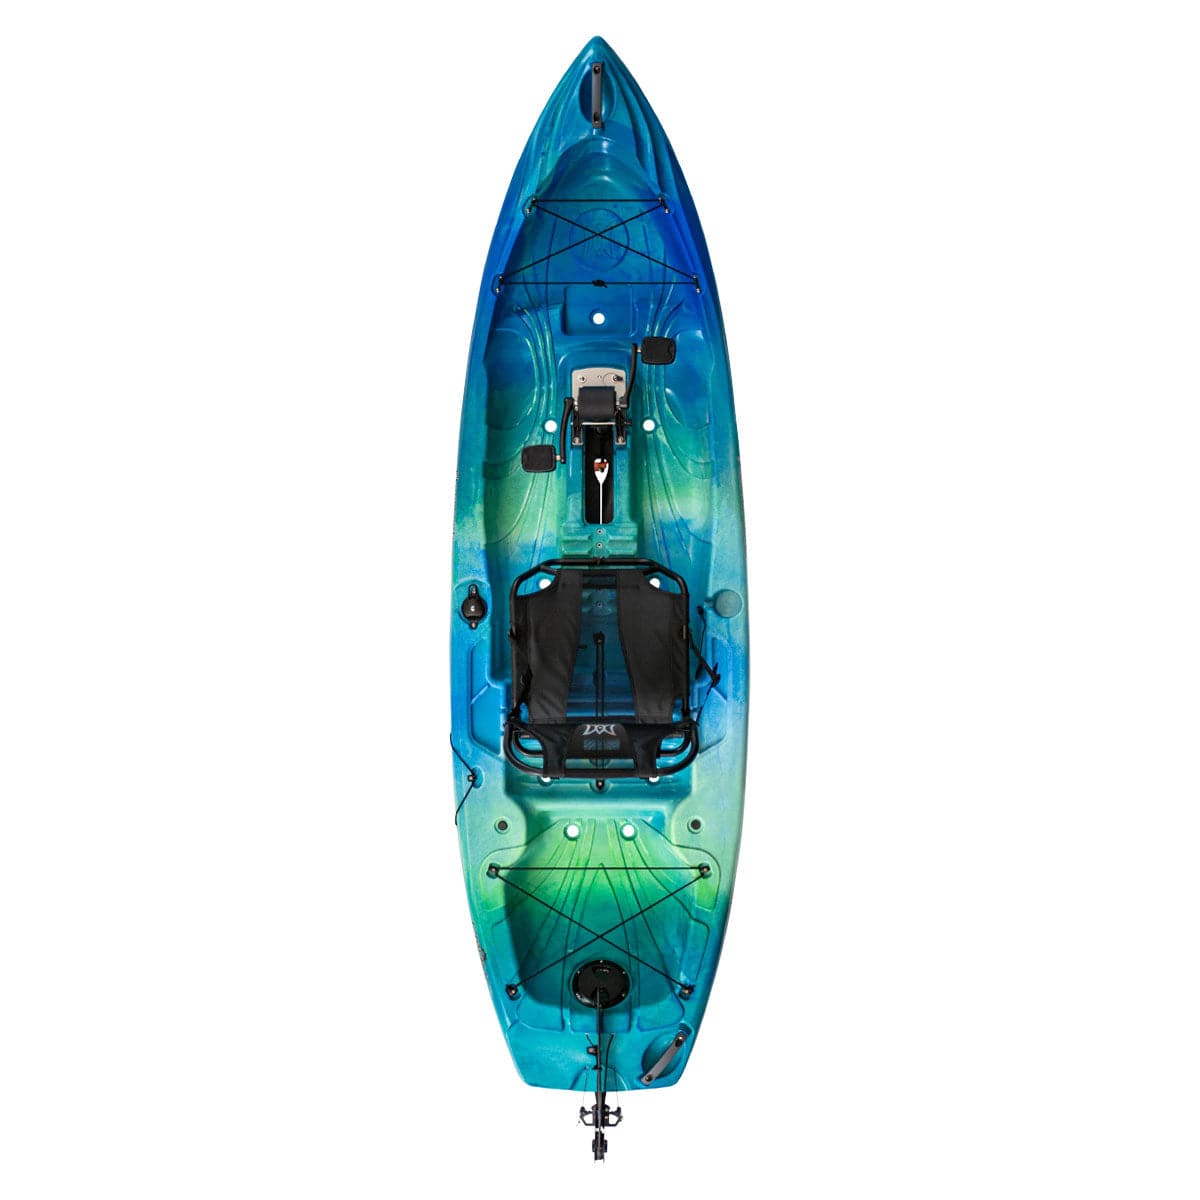 Featuring the Crank 10 fishing kayak, pedal drive kayak manufactured by Perception shown here from a second angle.